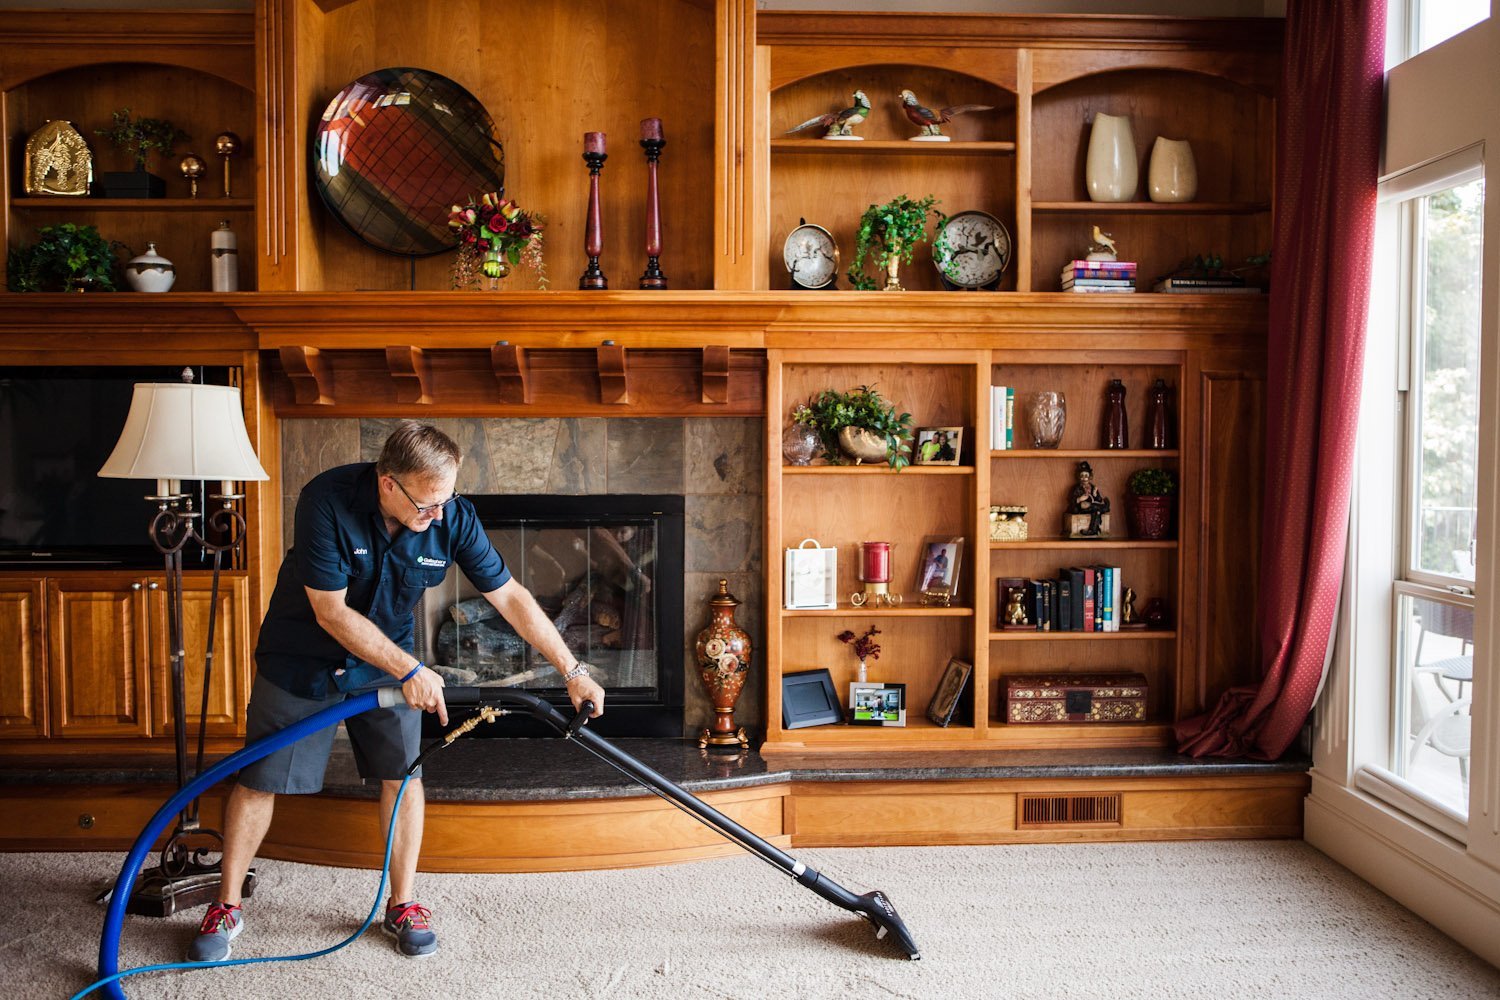 Hiring A Professional Carpet Cleaning Service vs Doing It Yourself – What You Should Know